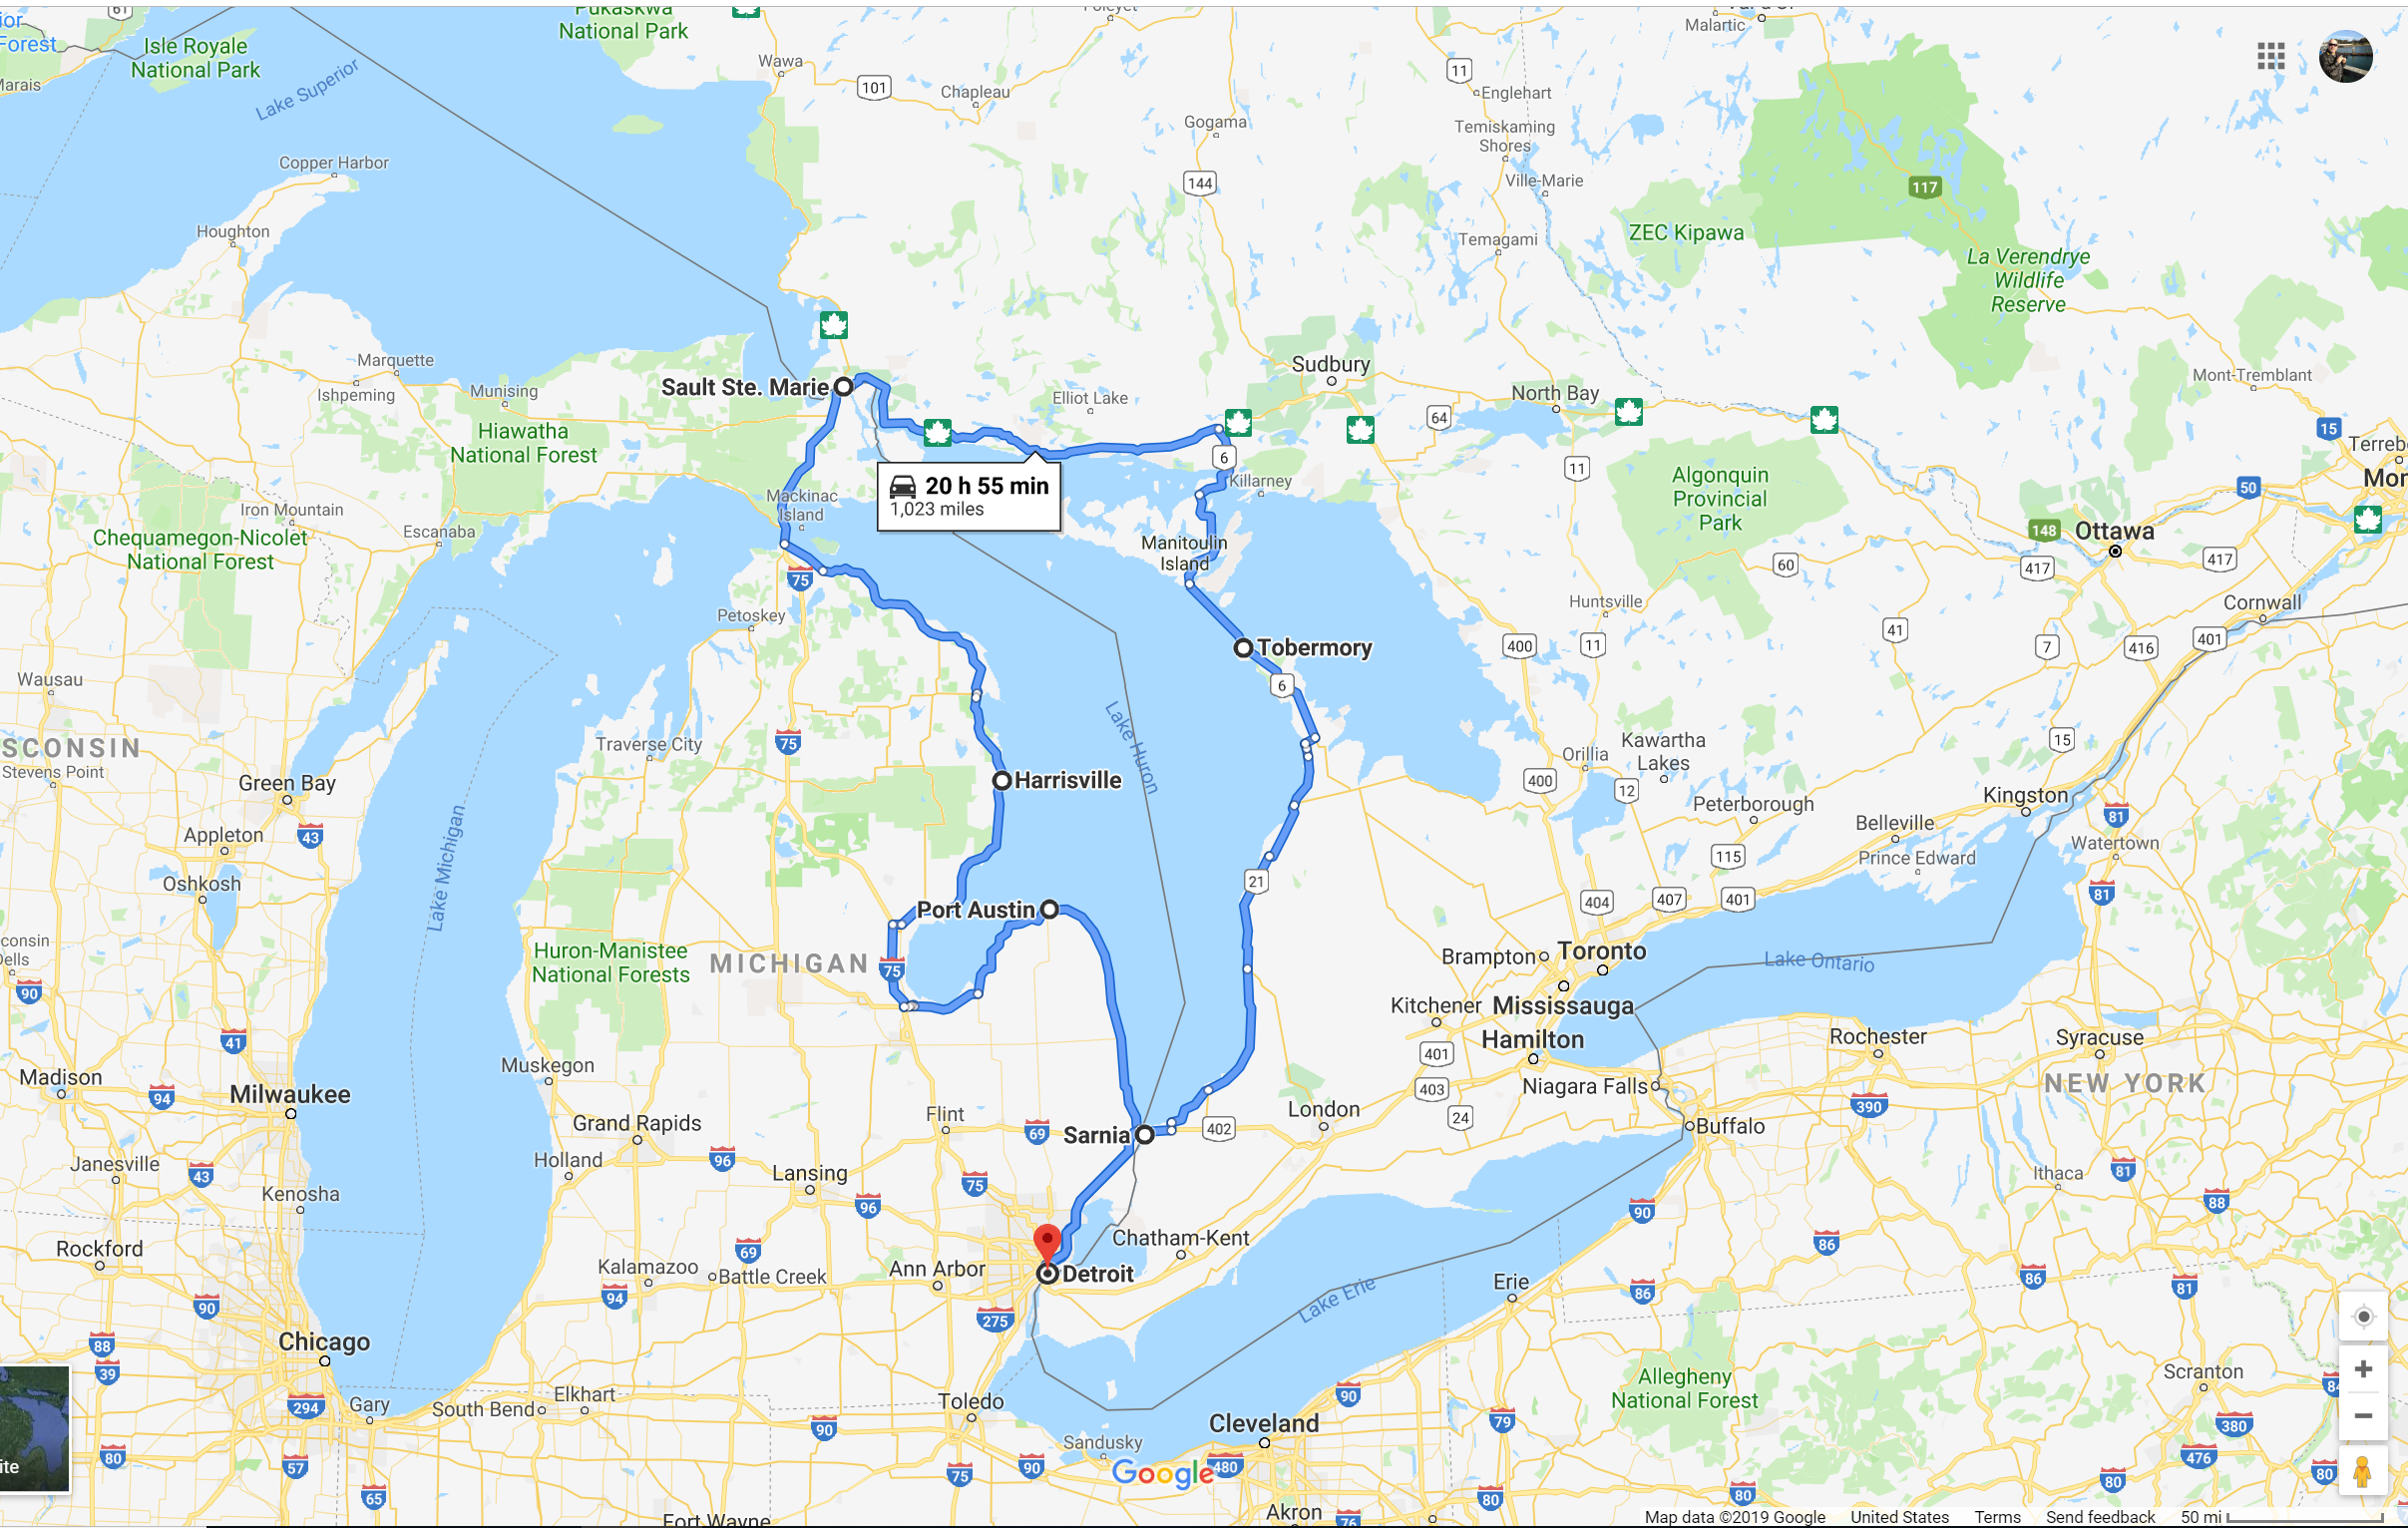 Contemplating 5 Great Lakes road trips on 5,000 miles of road – Loyalty ...